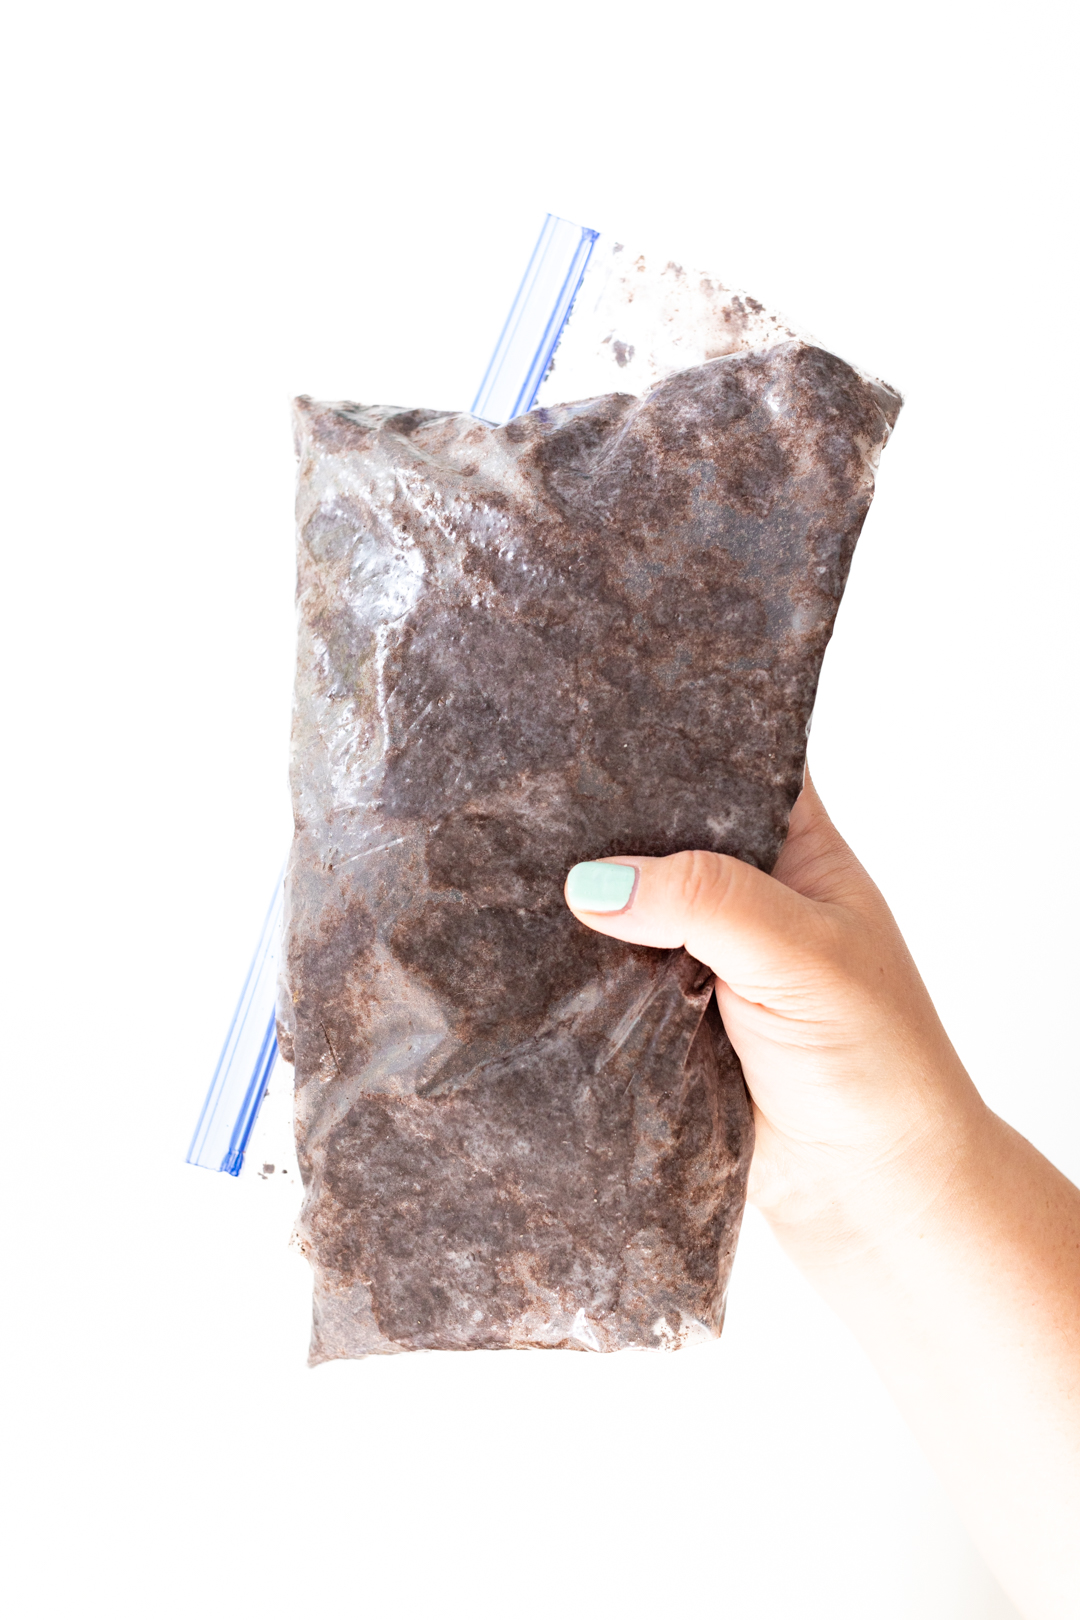 crushed oreo cookies in a gallon sized baggy